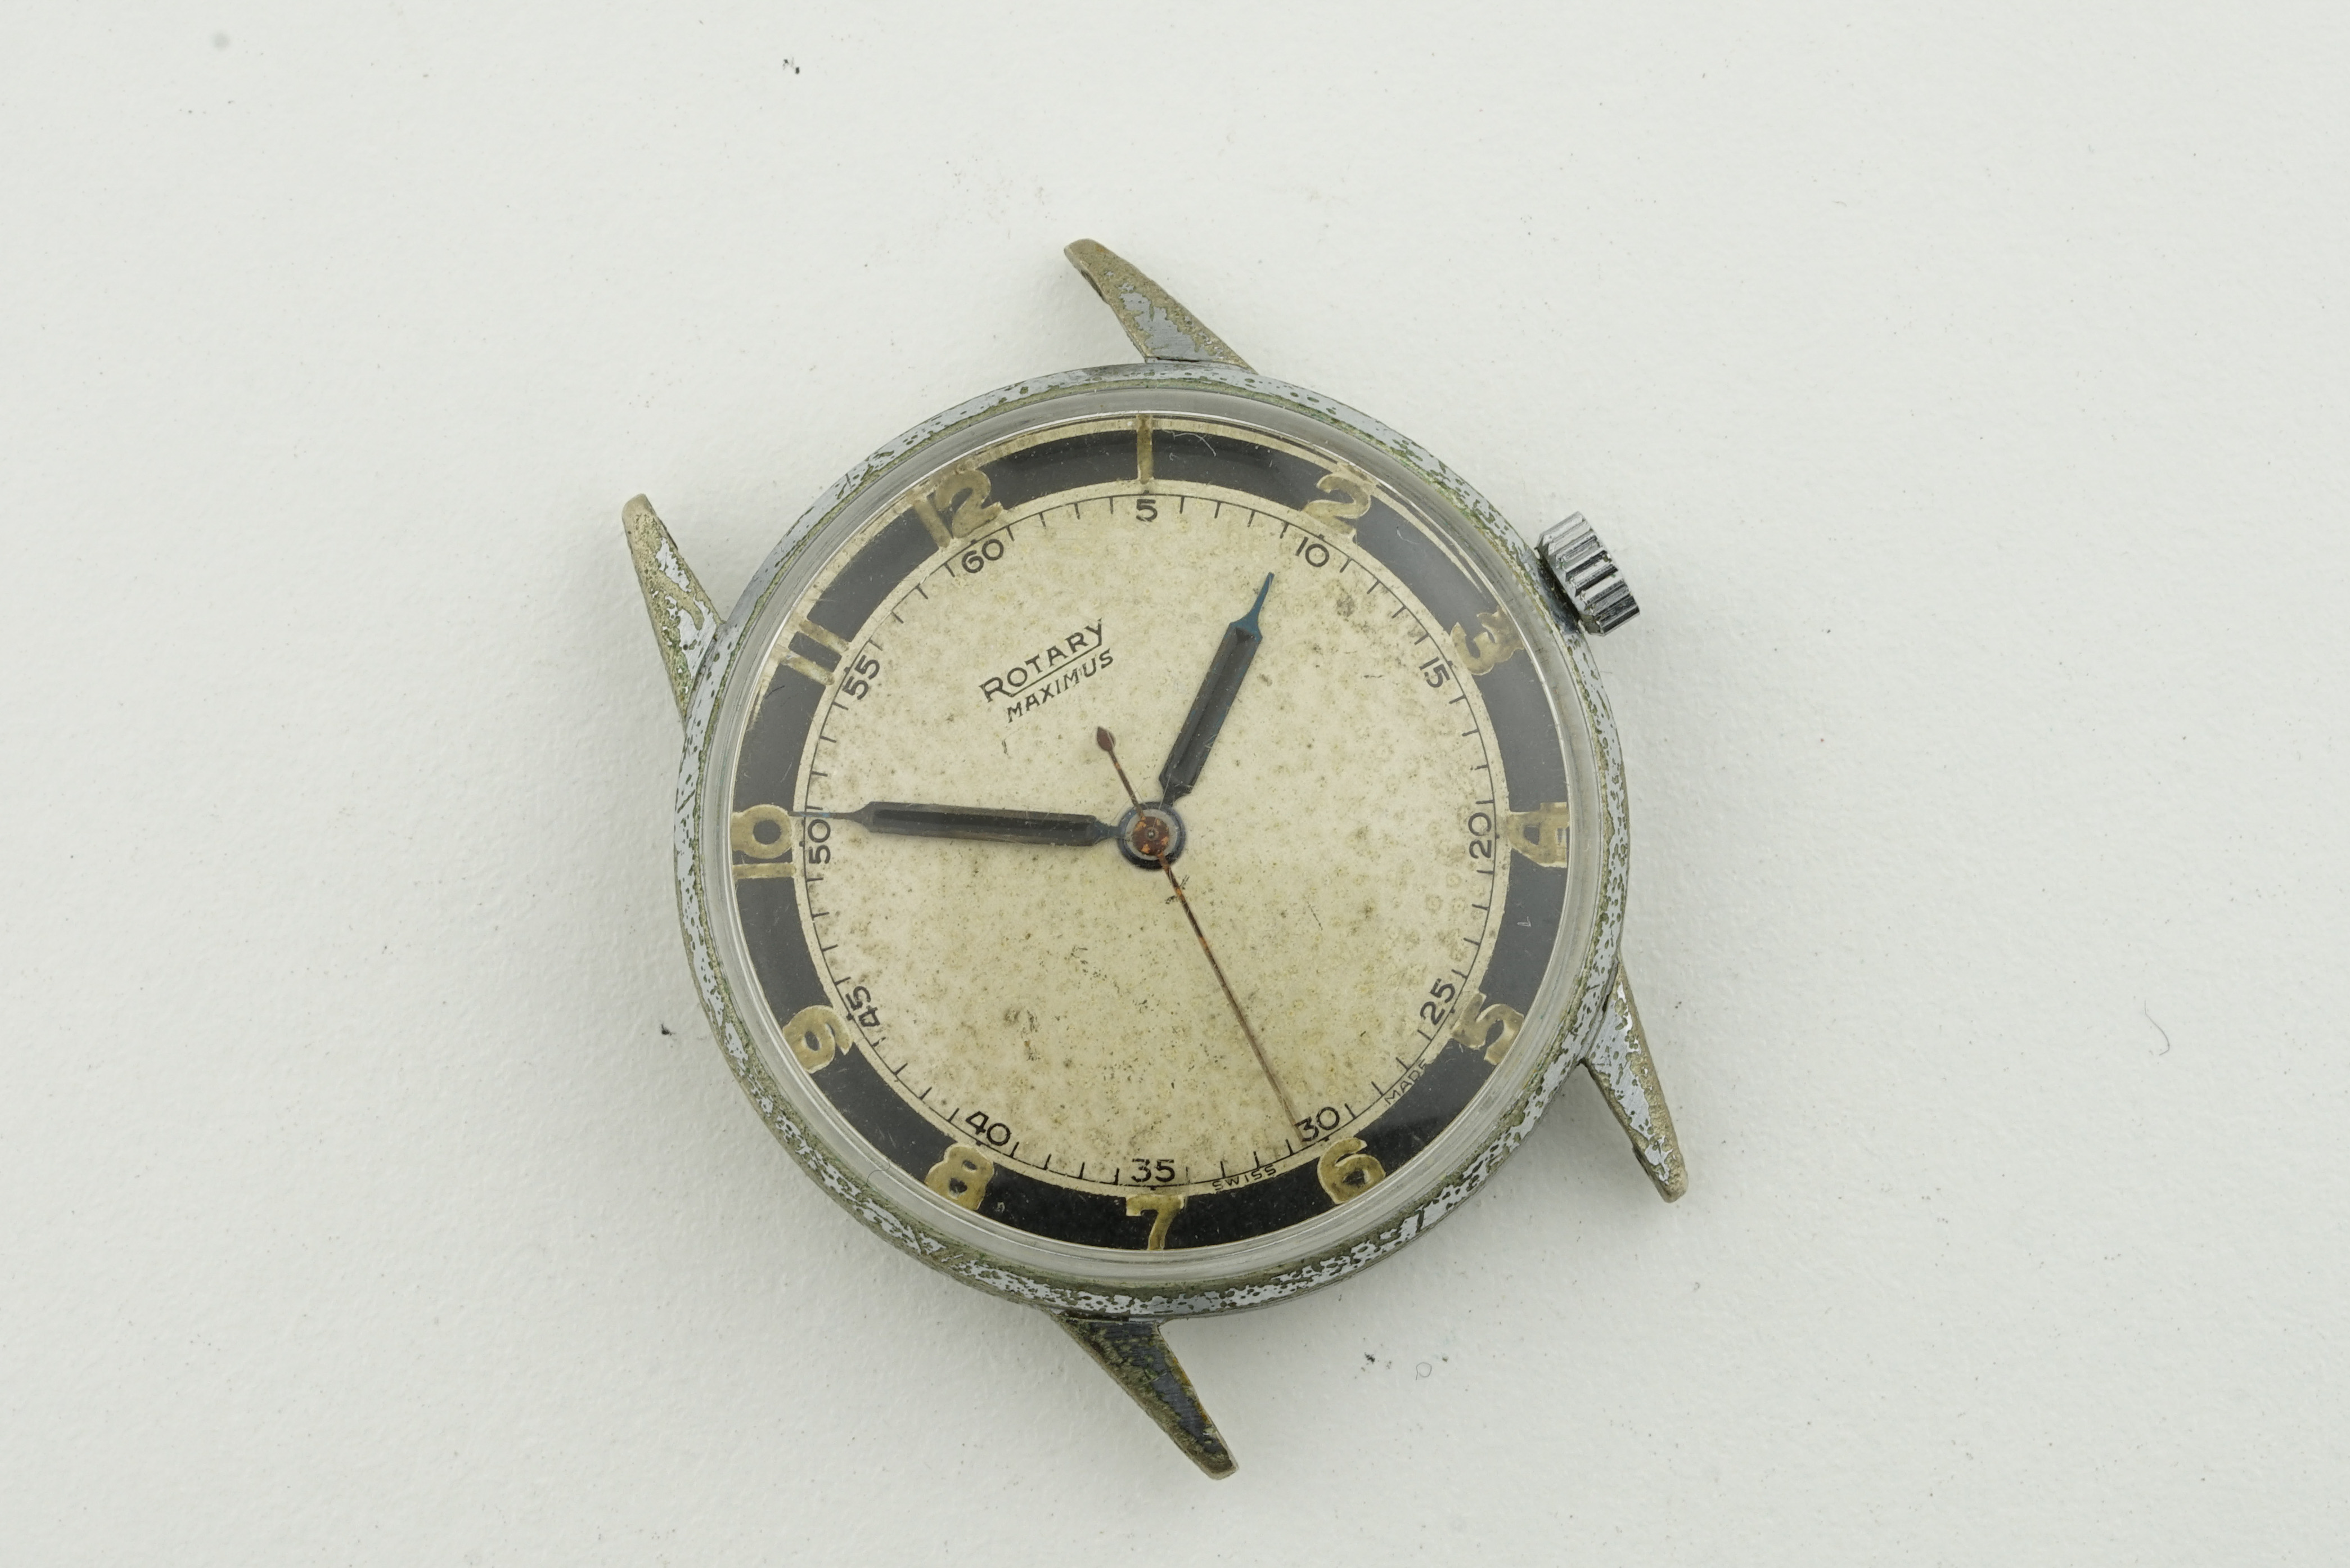 *NO RESERVE* ROTARTY MAXIMUS, manually wound movement, 35mm case, currently running.